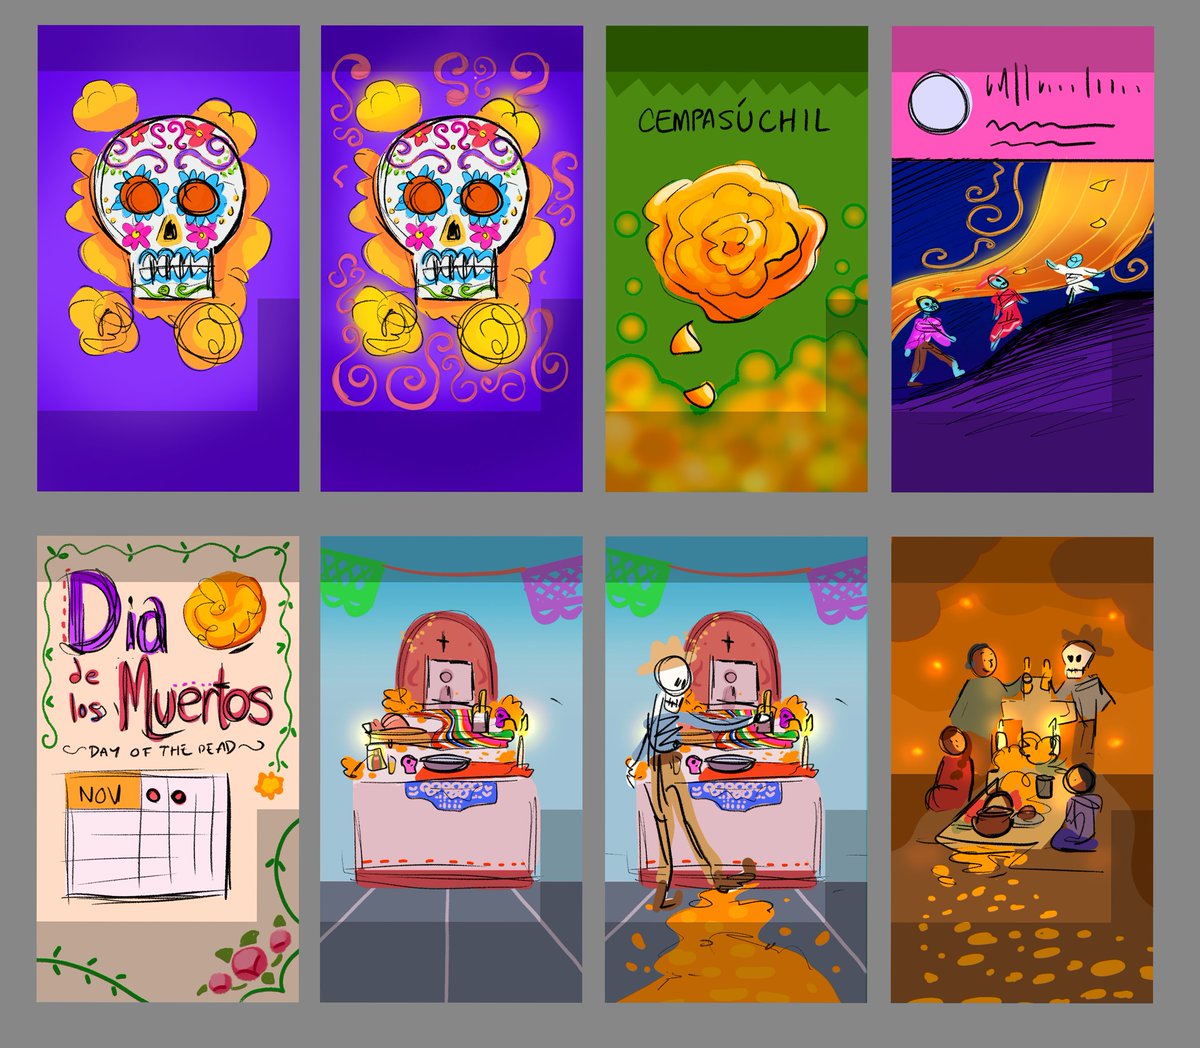 ¡Feliz Día de los Muertos!

I was lucky and able to do some design and consultation for npr's day of the dead IG video this year which was animated by the amazing @kazfantone !! 